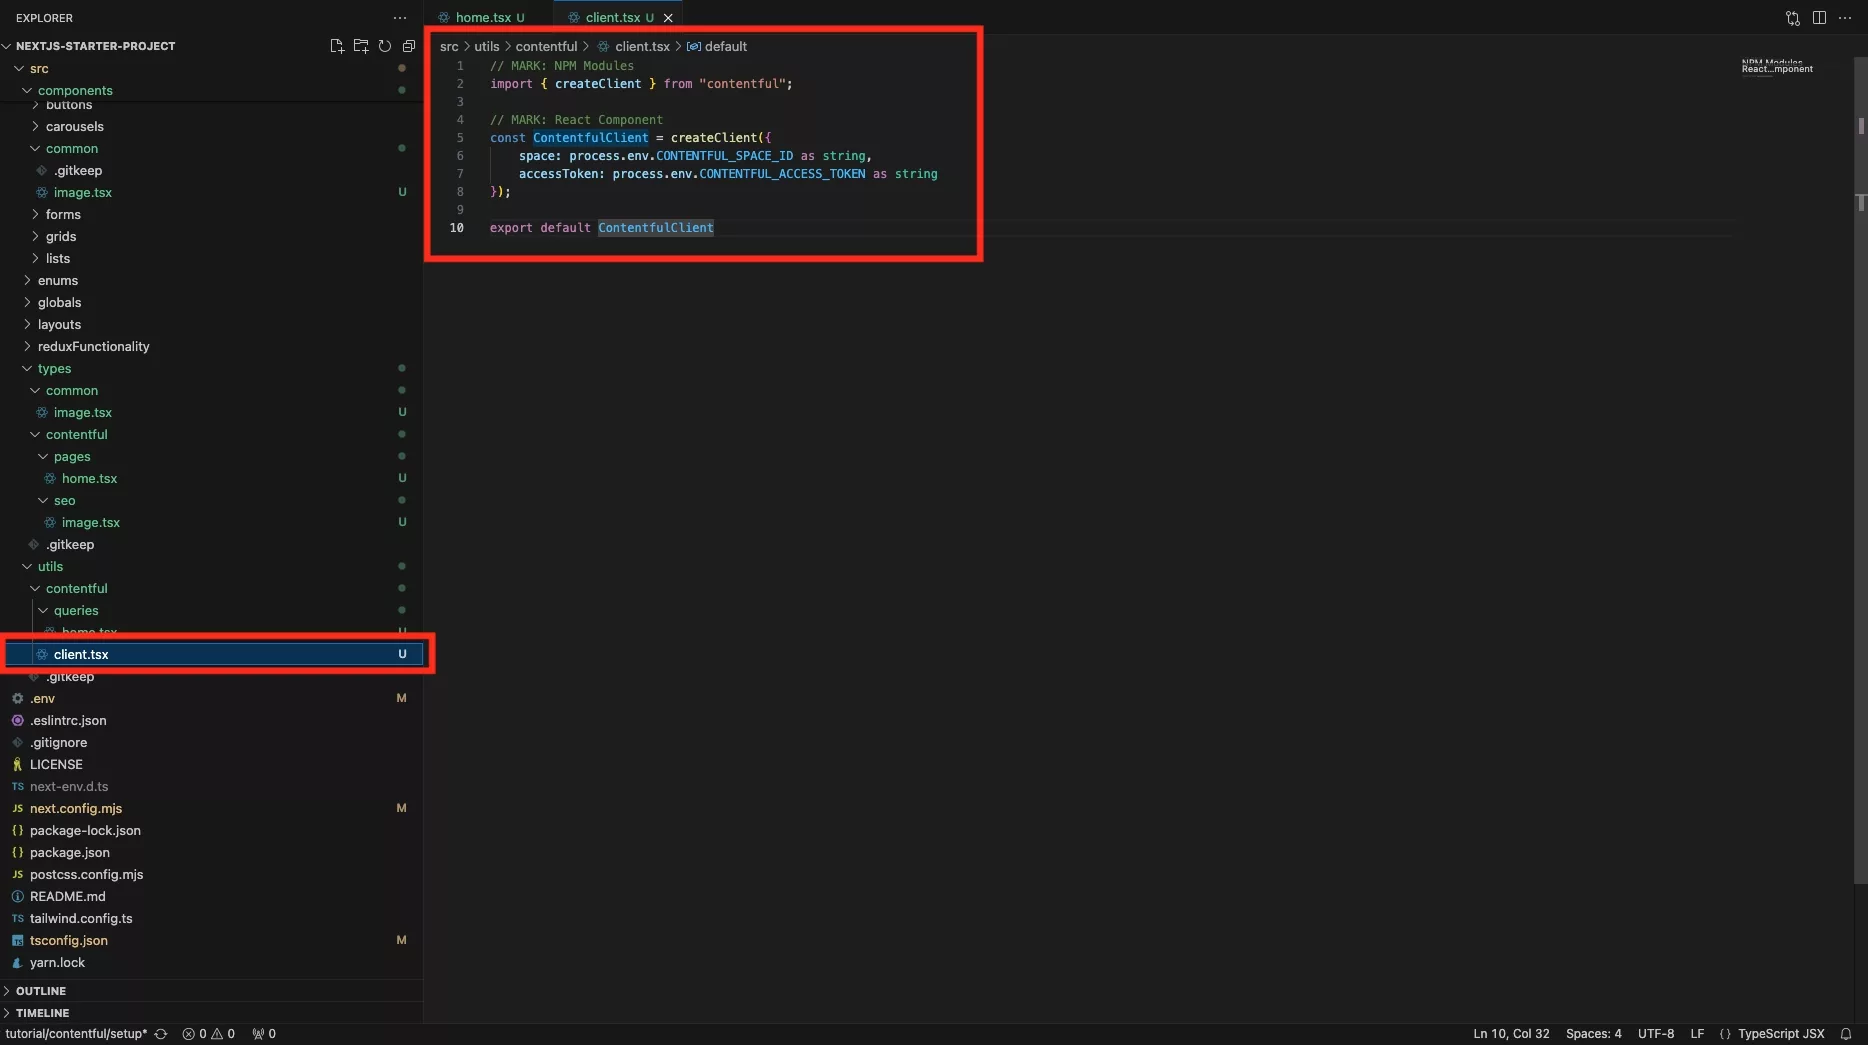 A screenshot of VSCode showing the Contentful Client code.